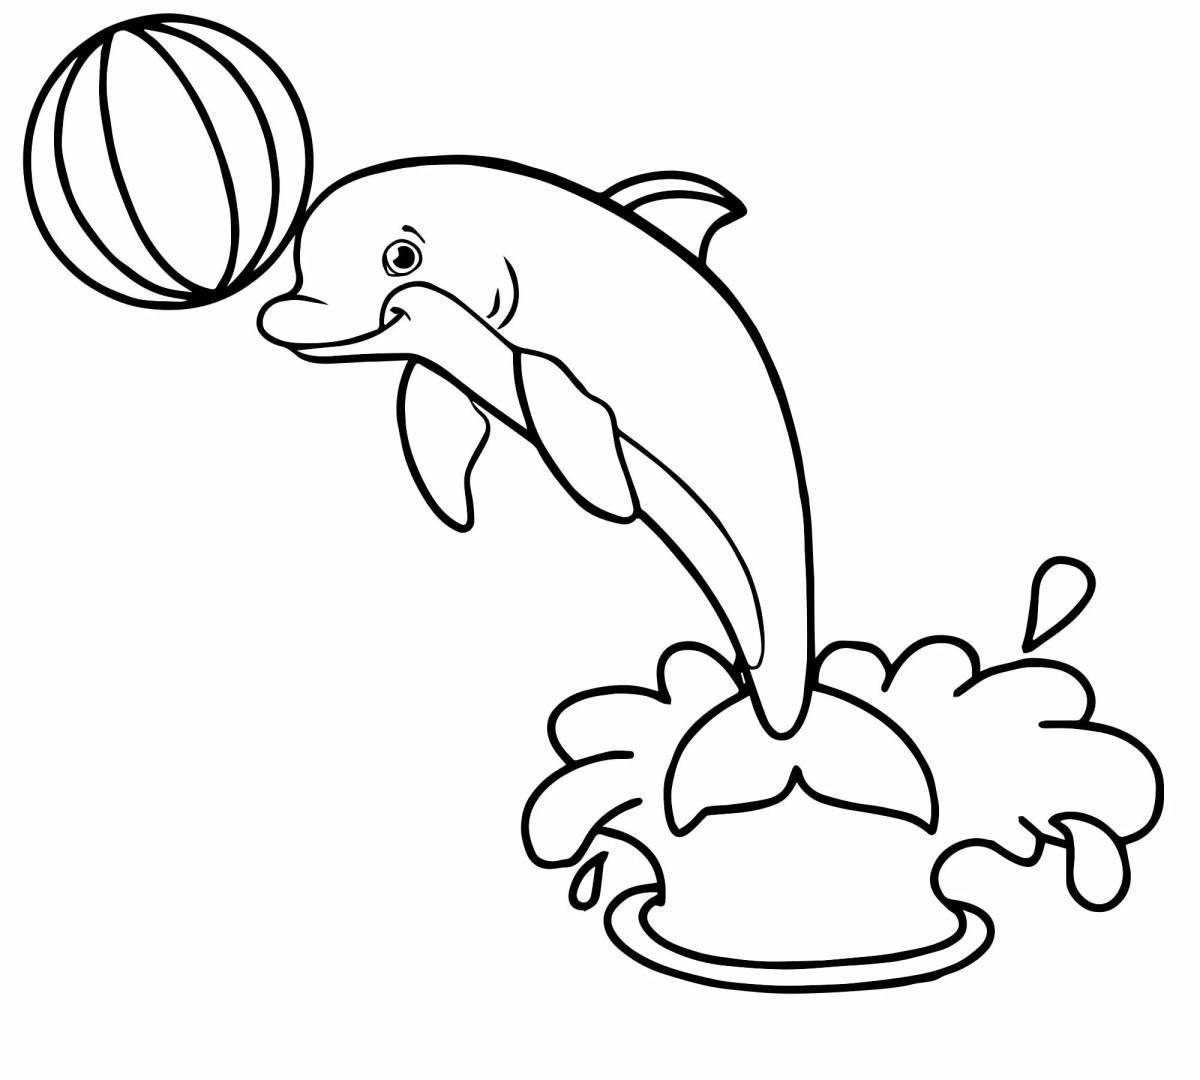 Great dolphin coloring page